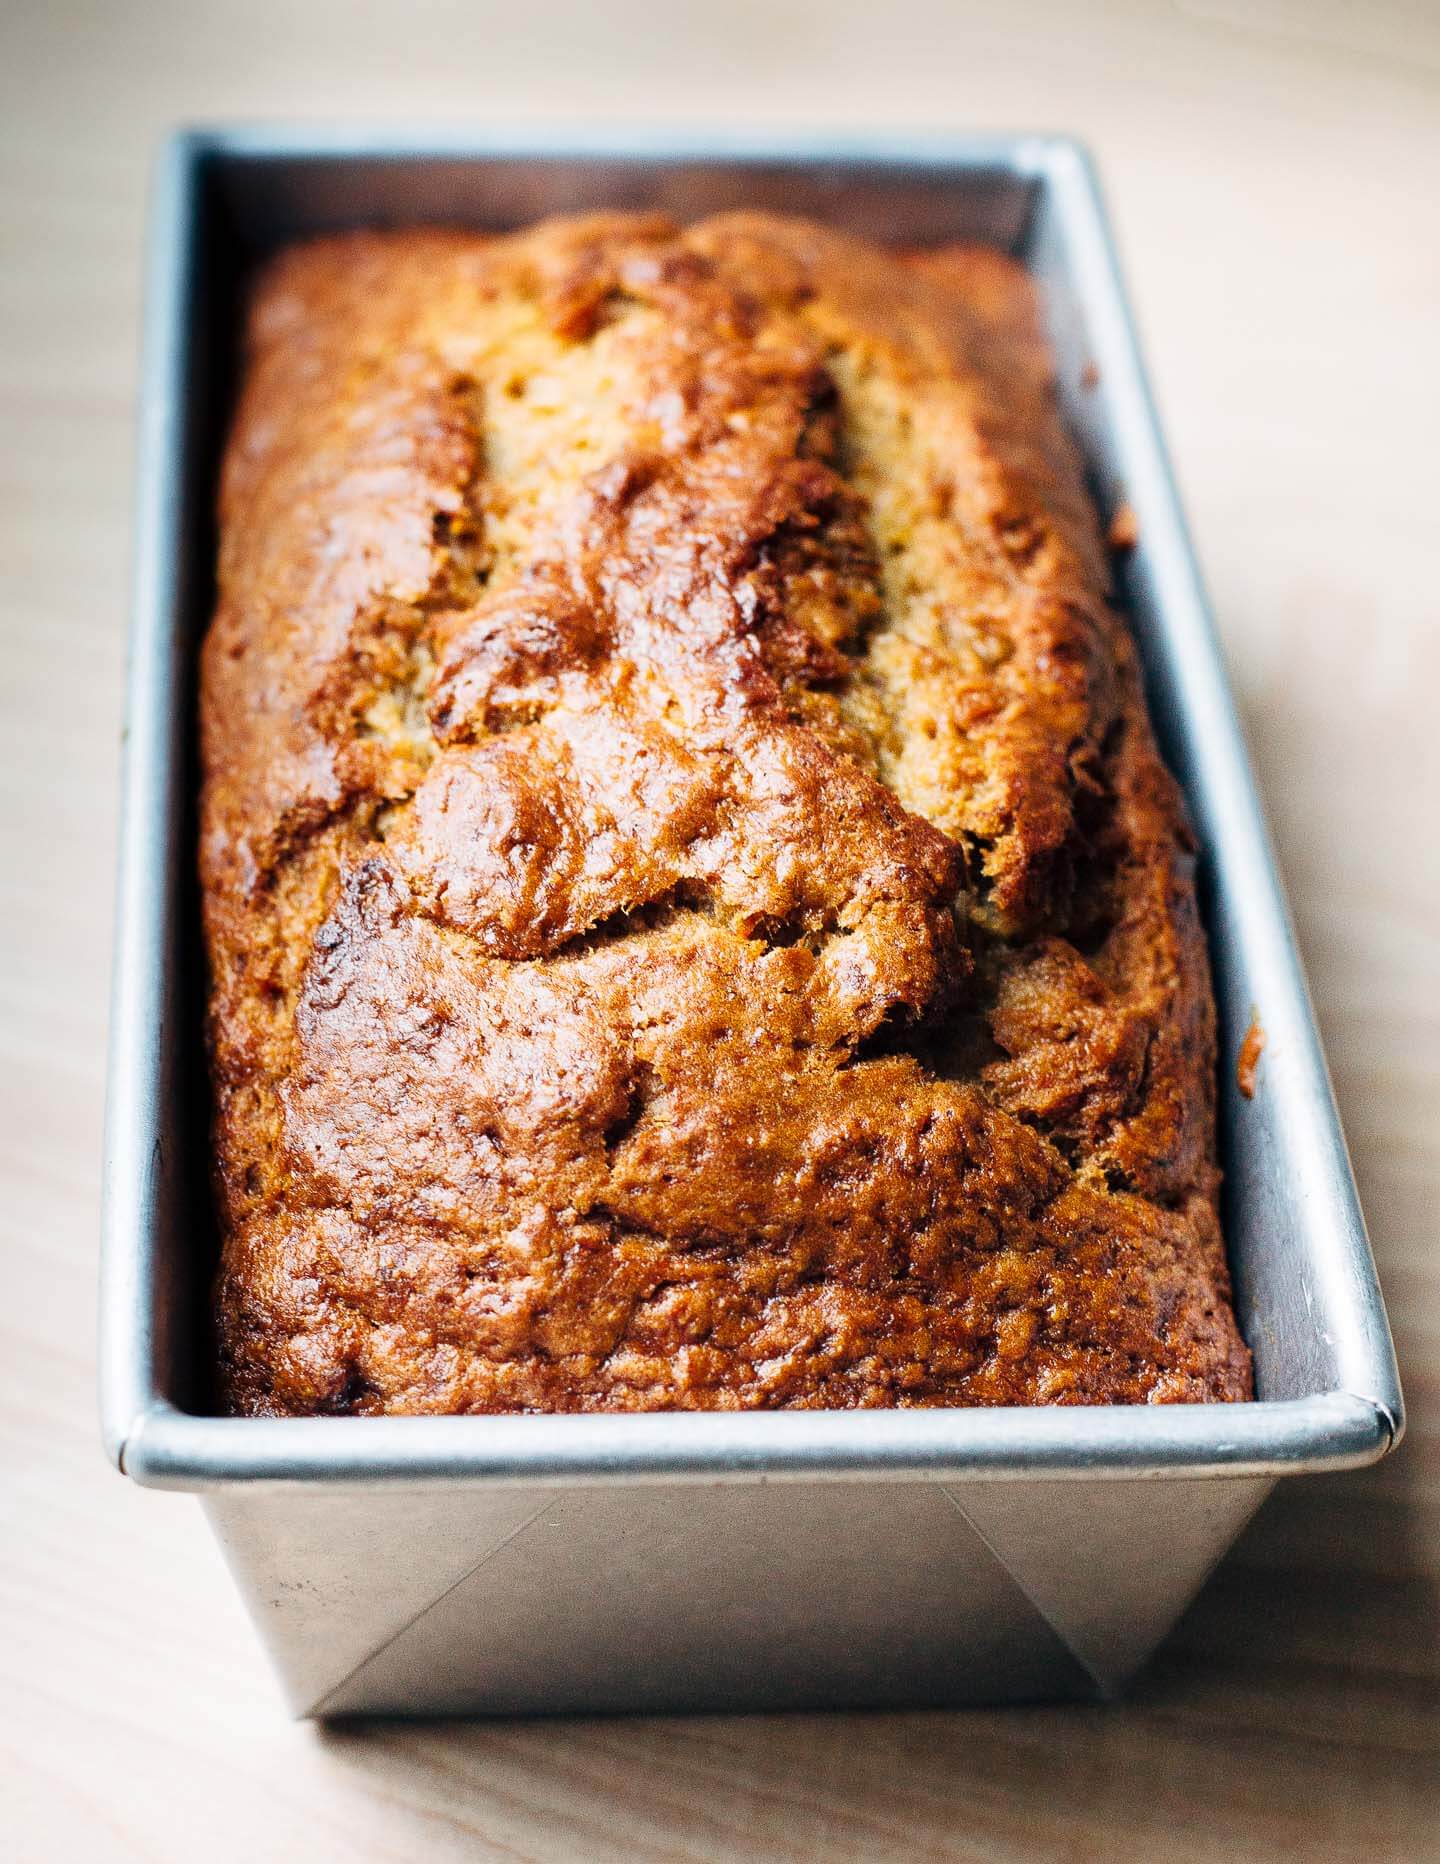 This basic banana bread recipe is perfect for folks who are new to baking.